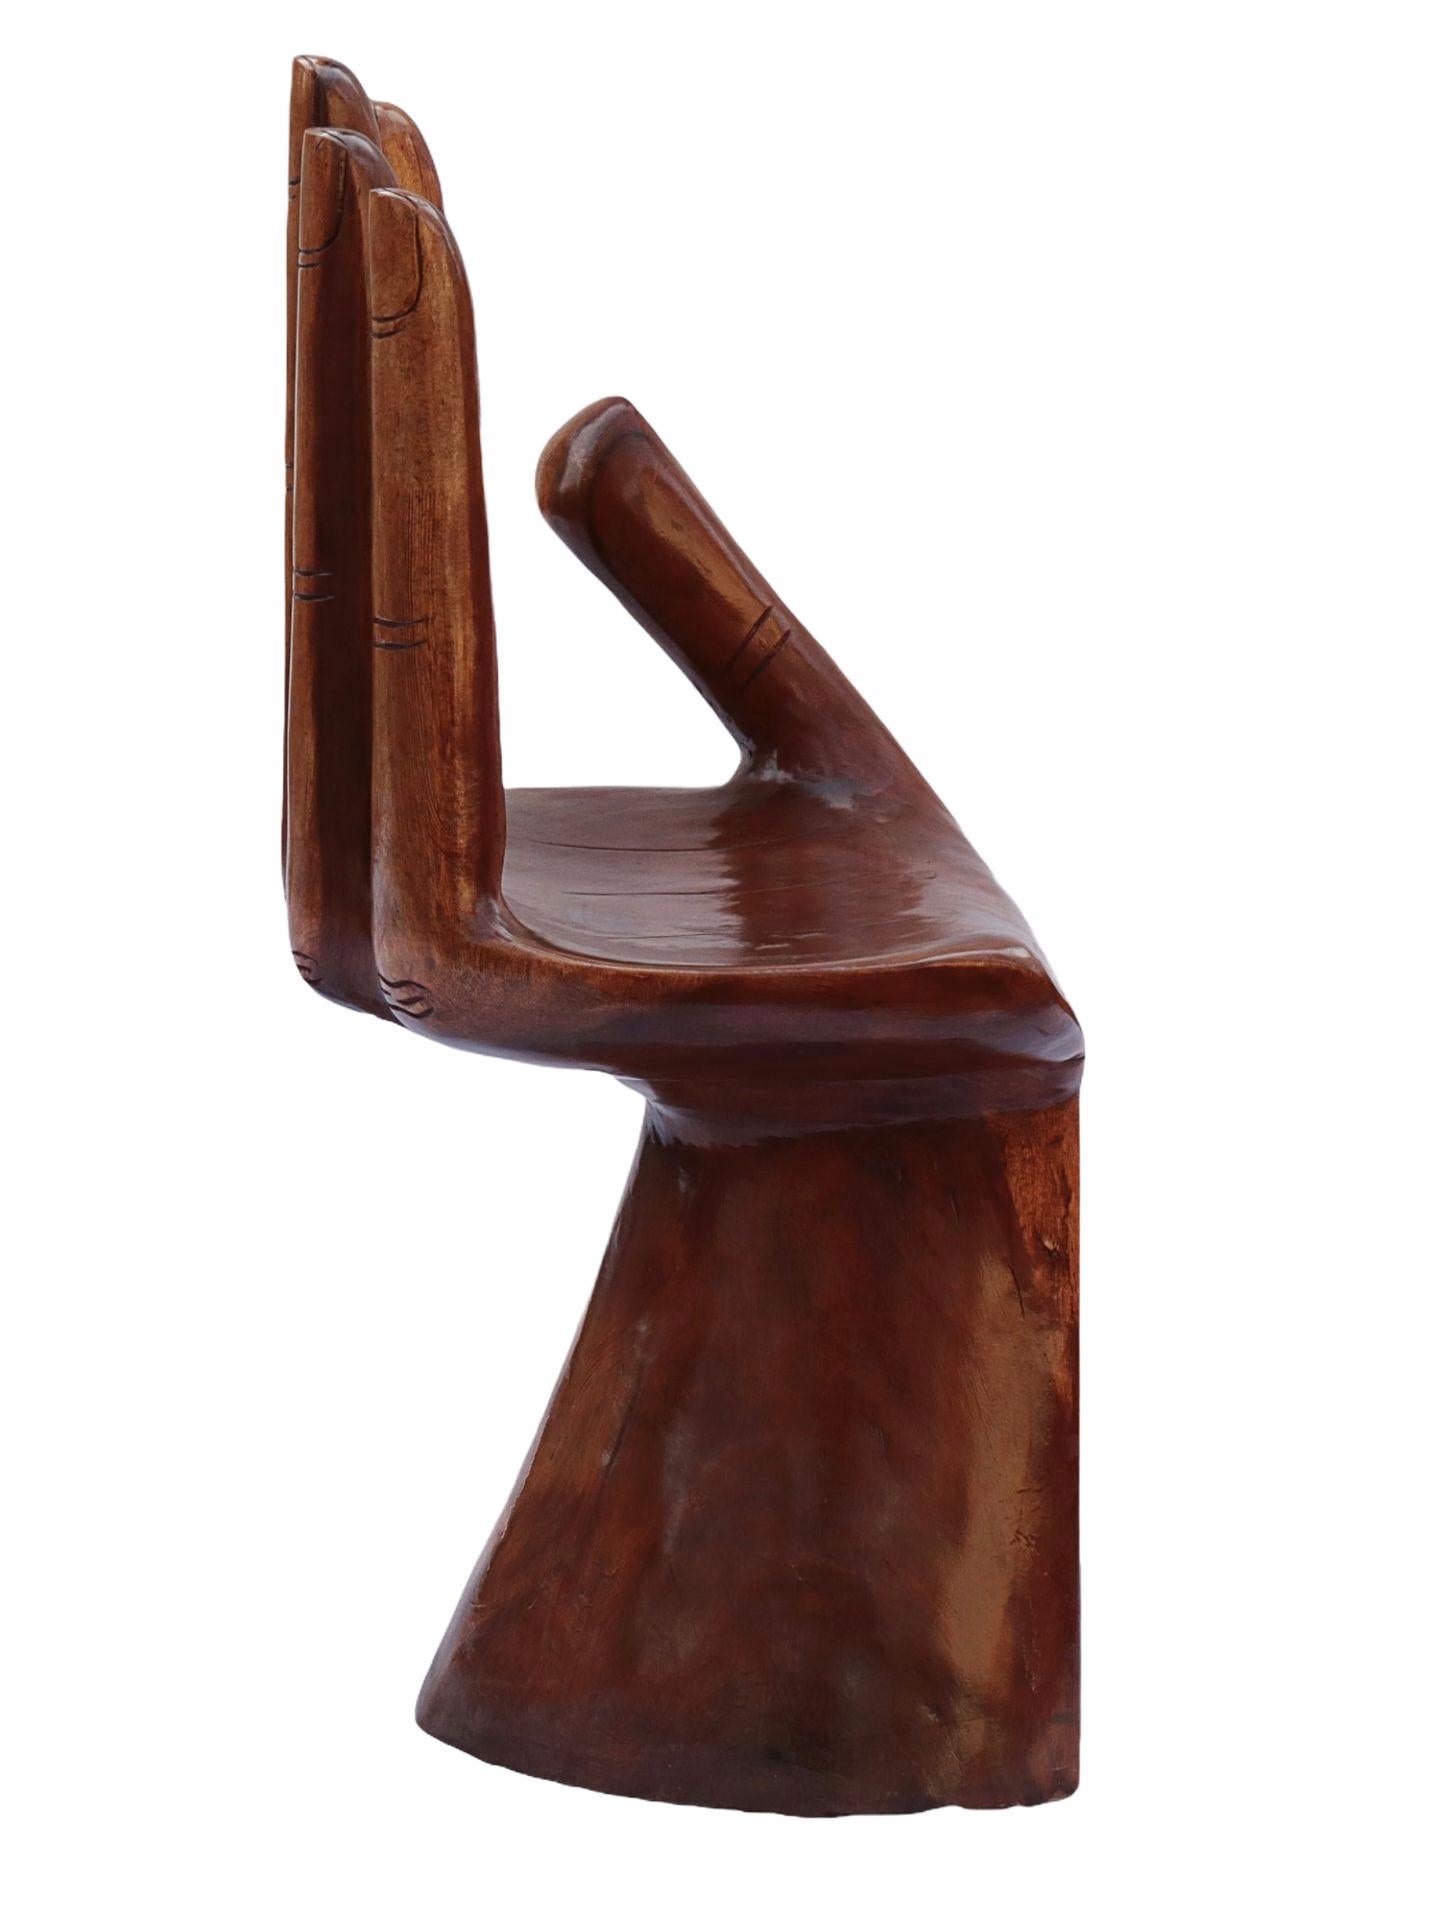 German Carved Hand Chair in the Style of Pedro Friedeberg, circa 1970s